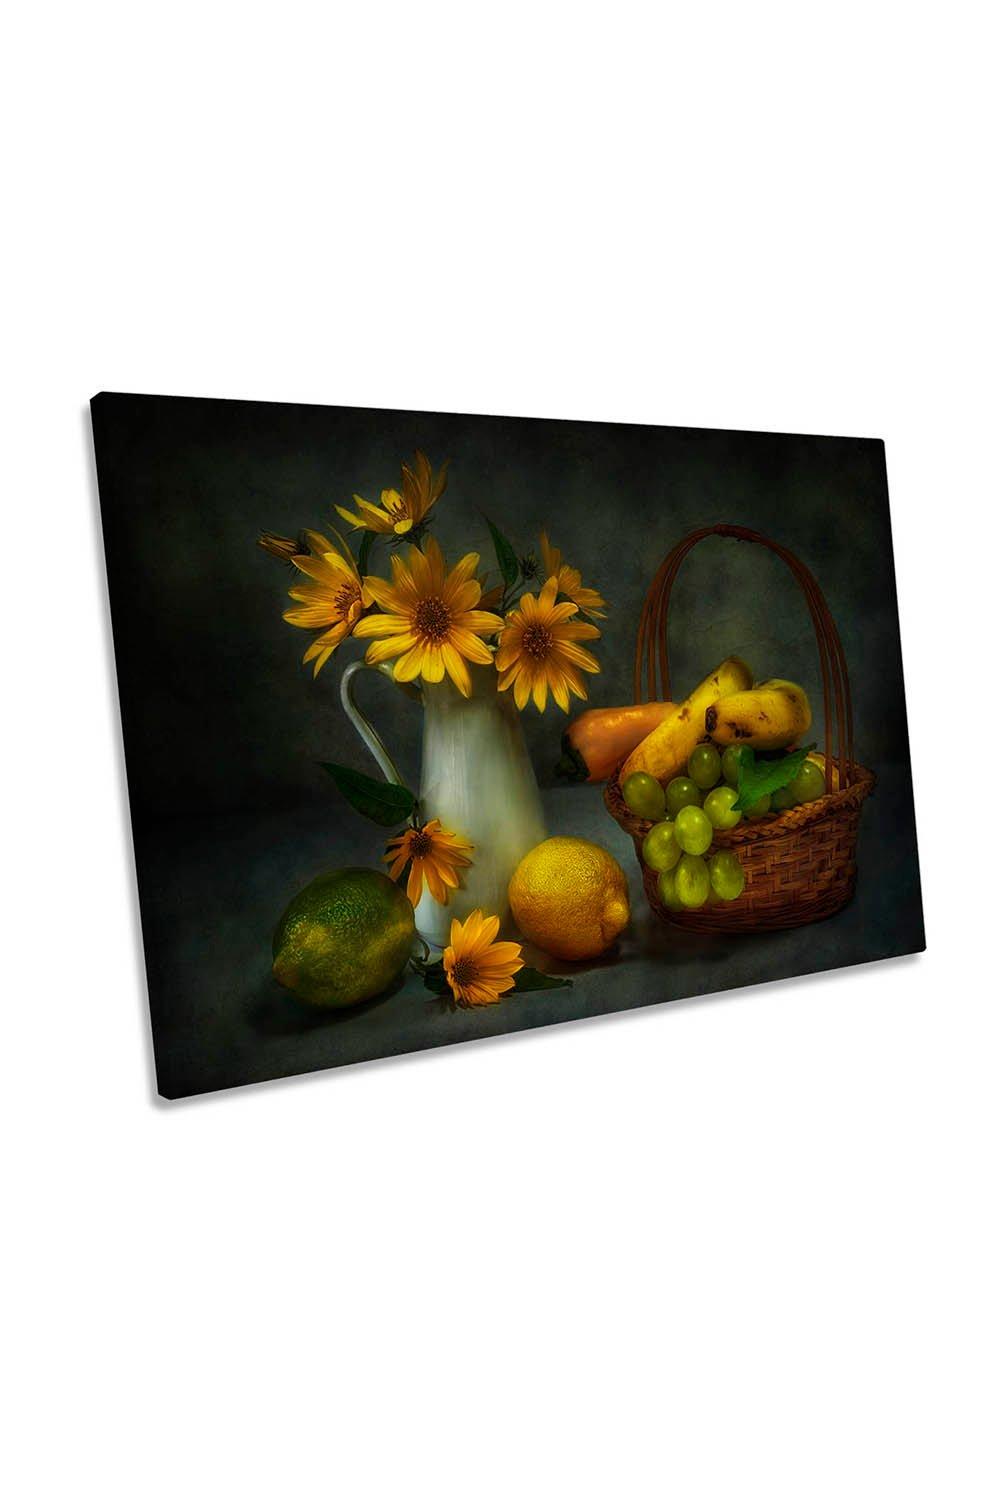 Greens and Yellows Fruit Basket Kitchen Canvas Wall Art Picture Print